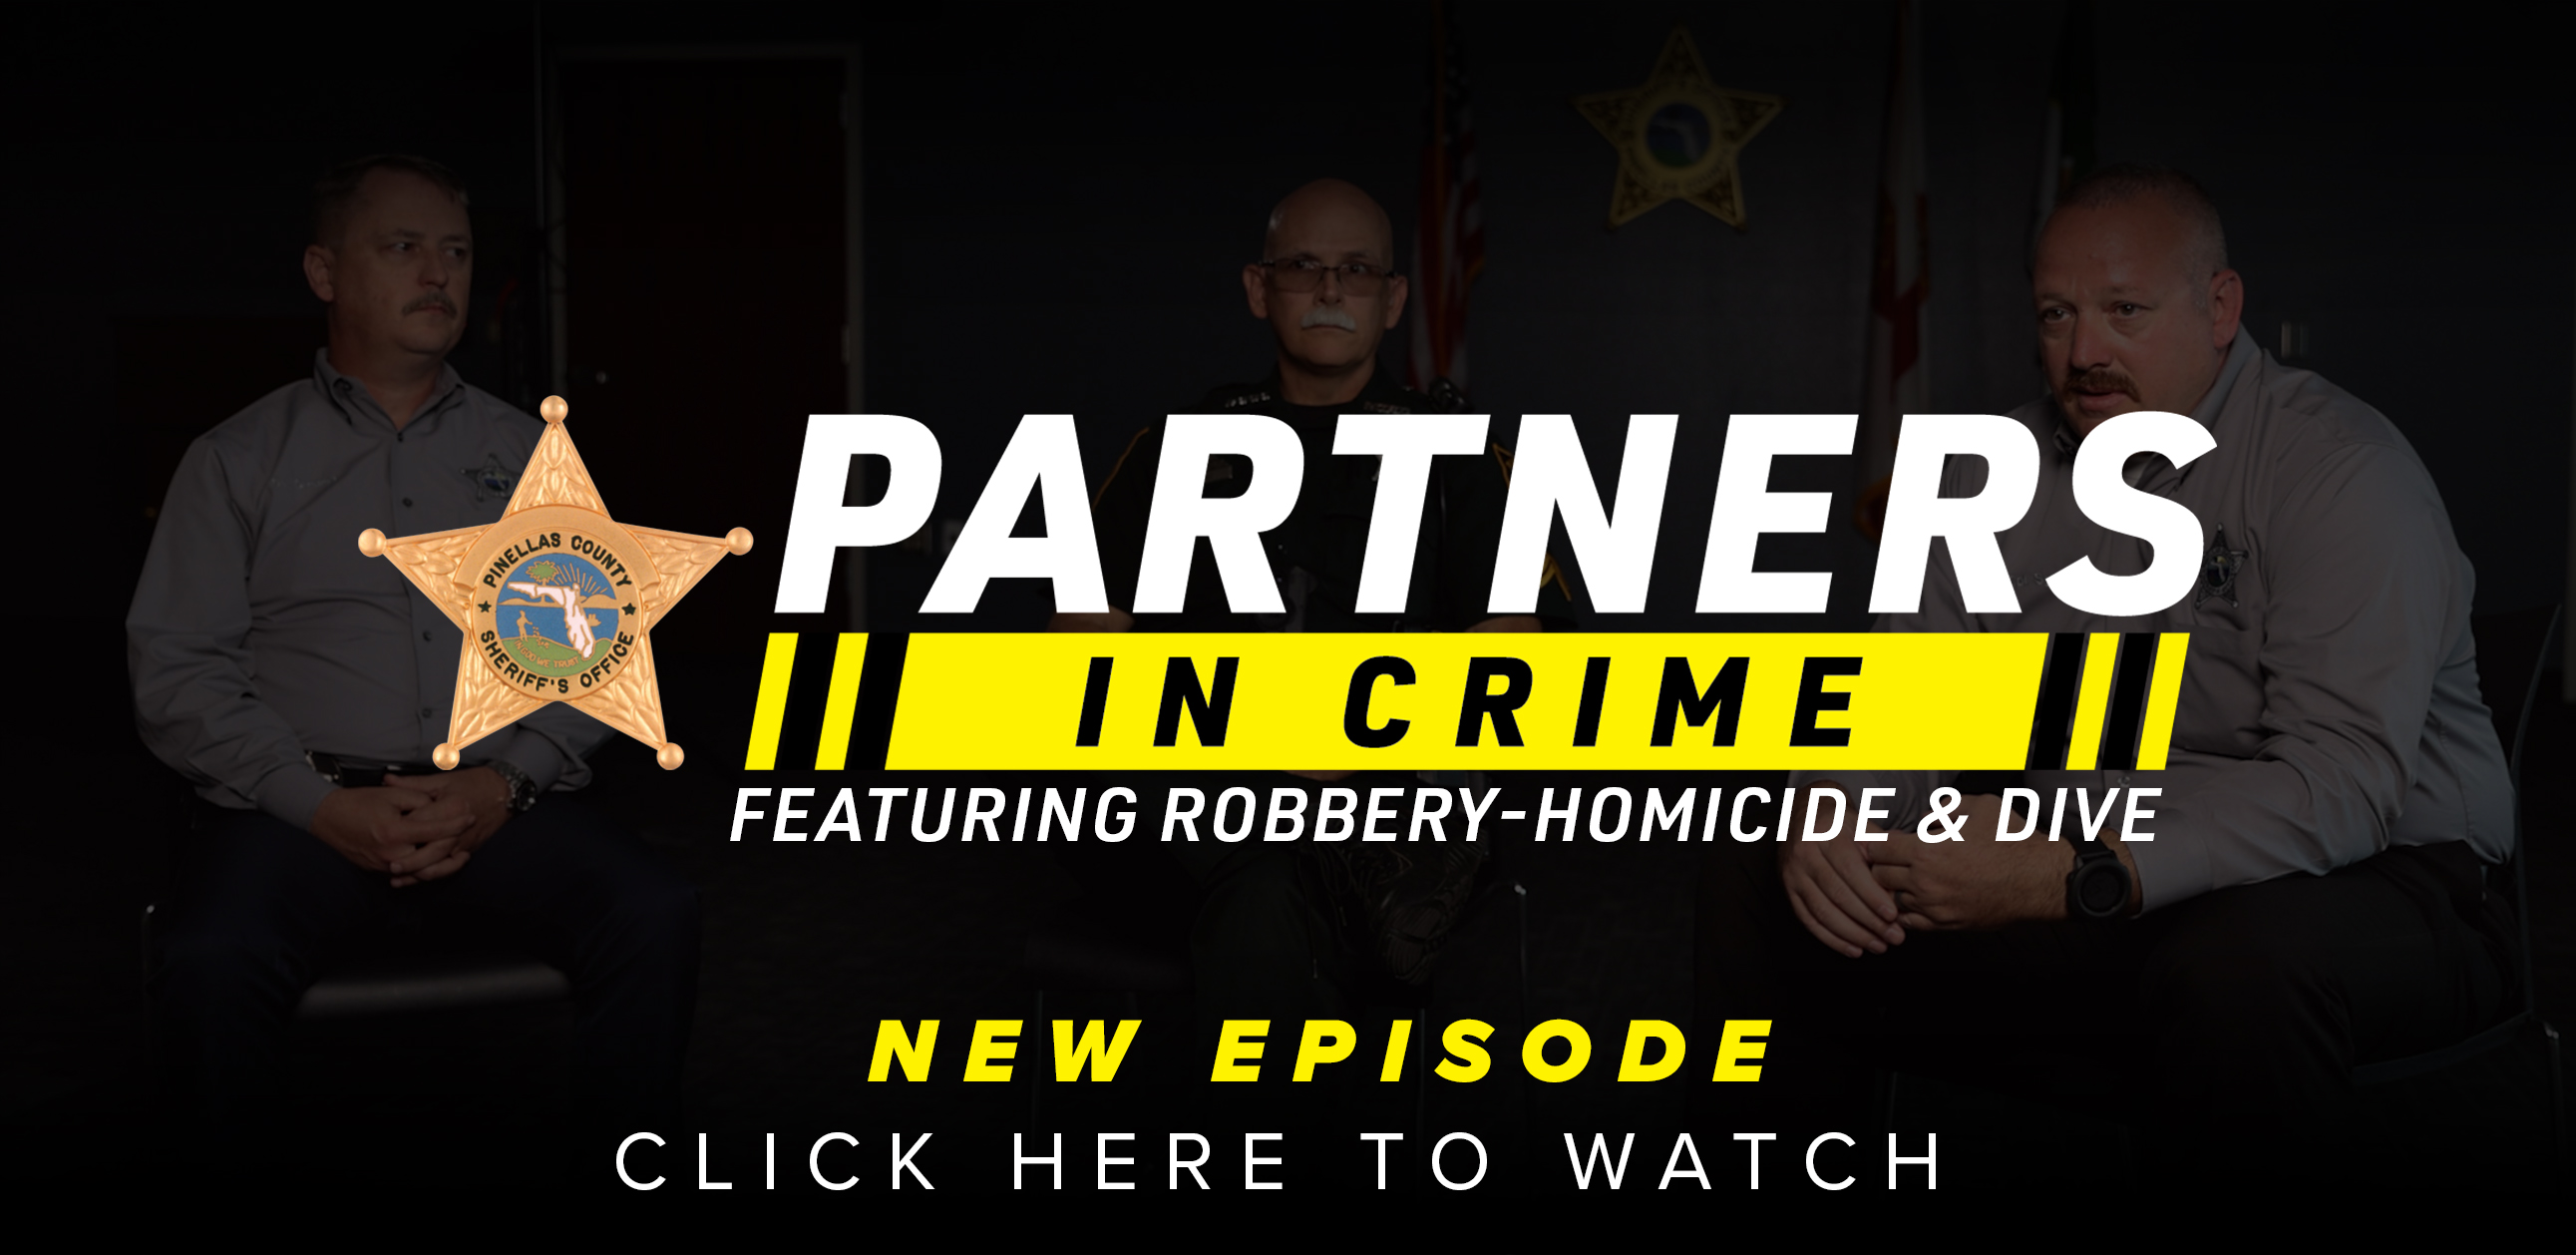 Partners, Robbery-Homicide and Dive